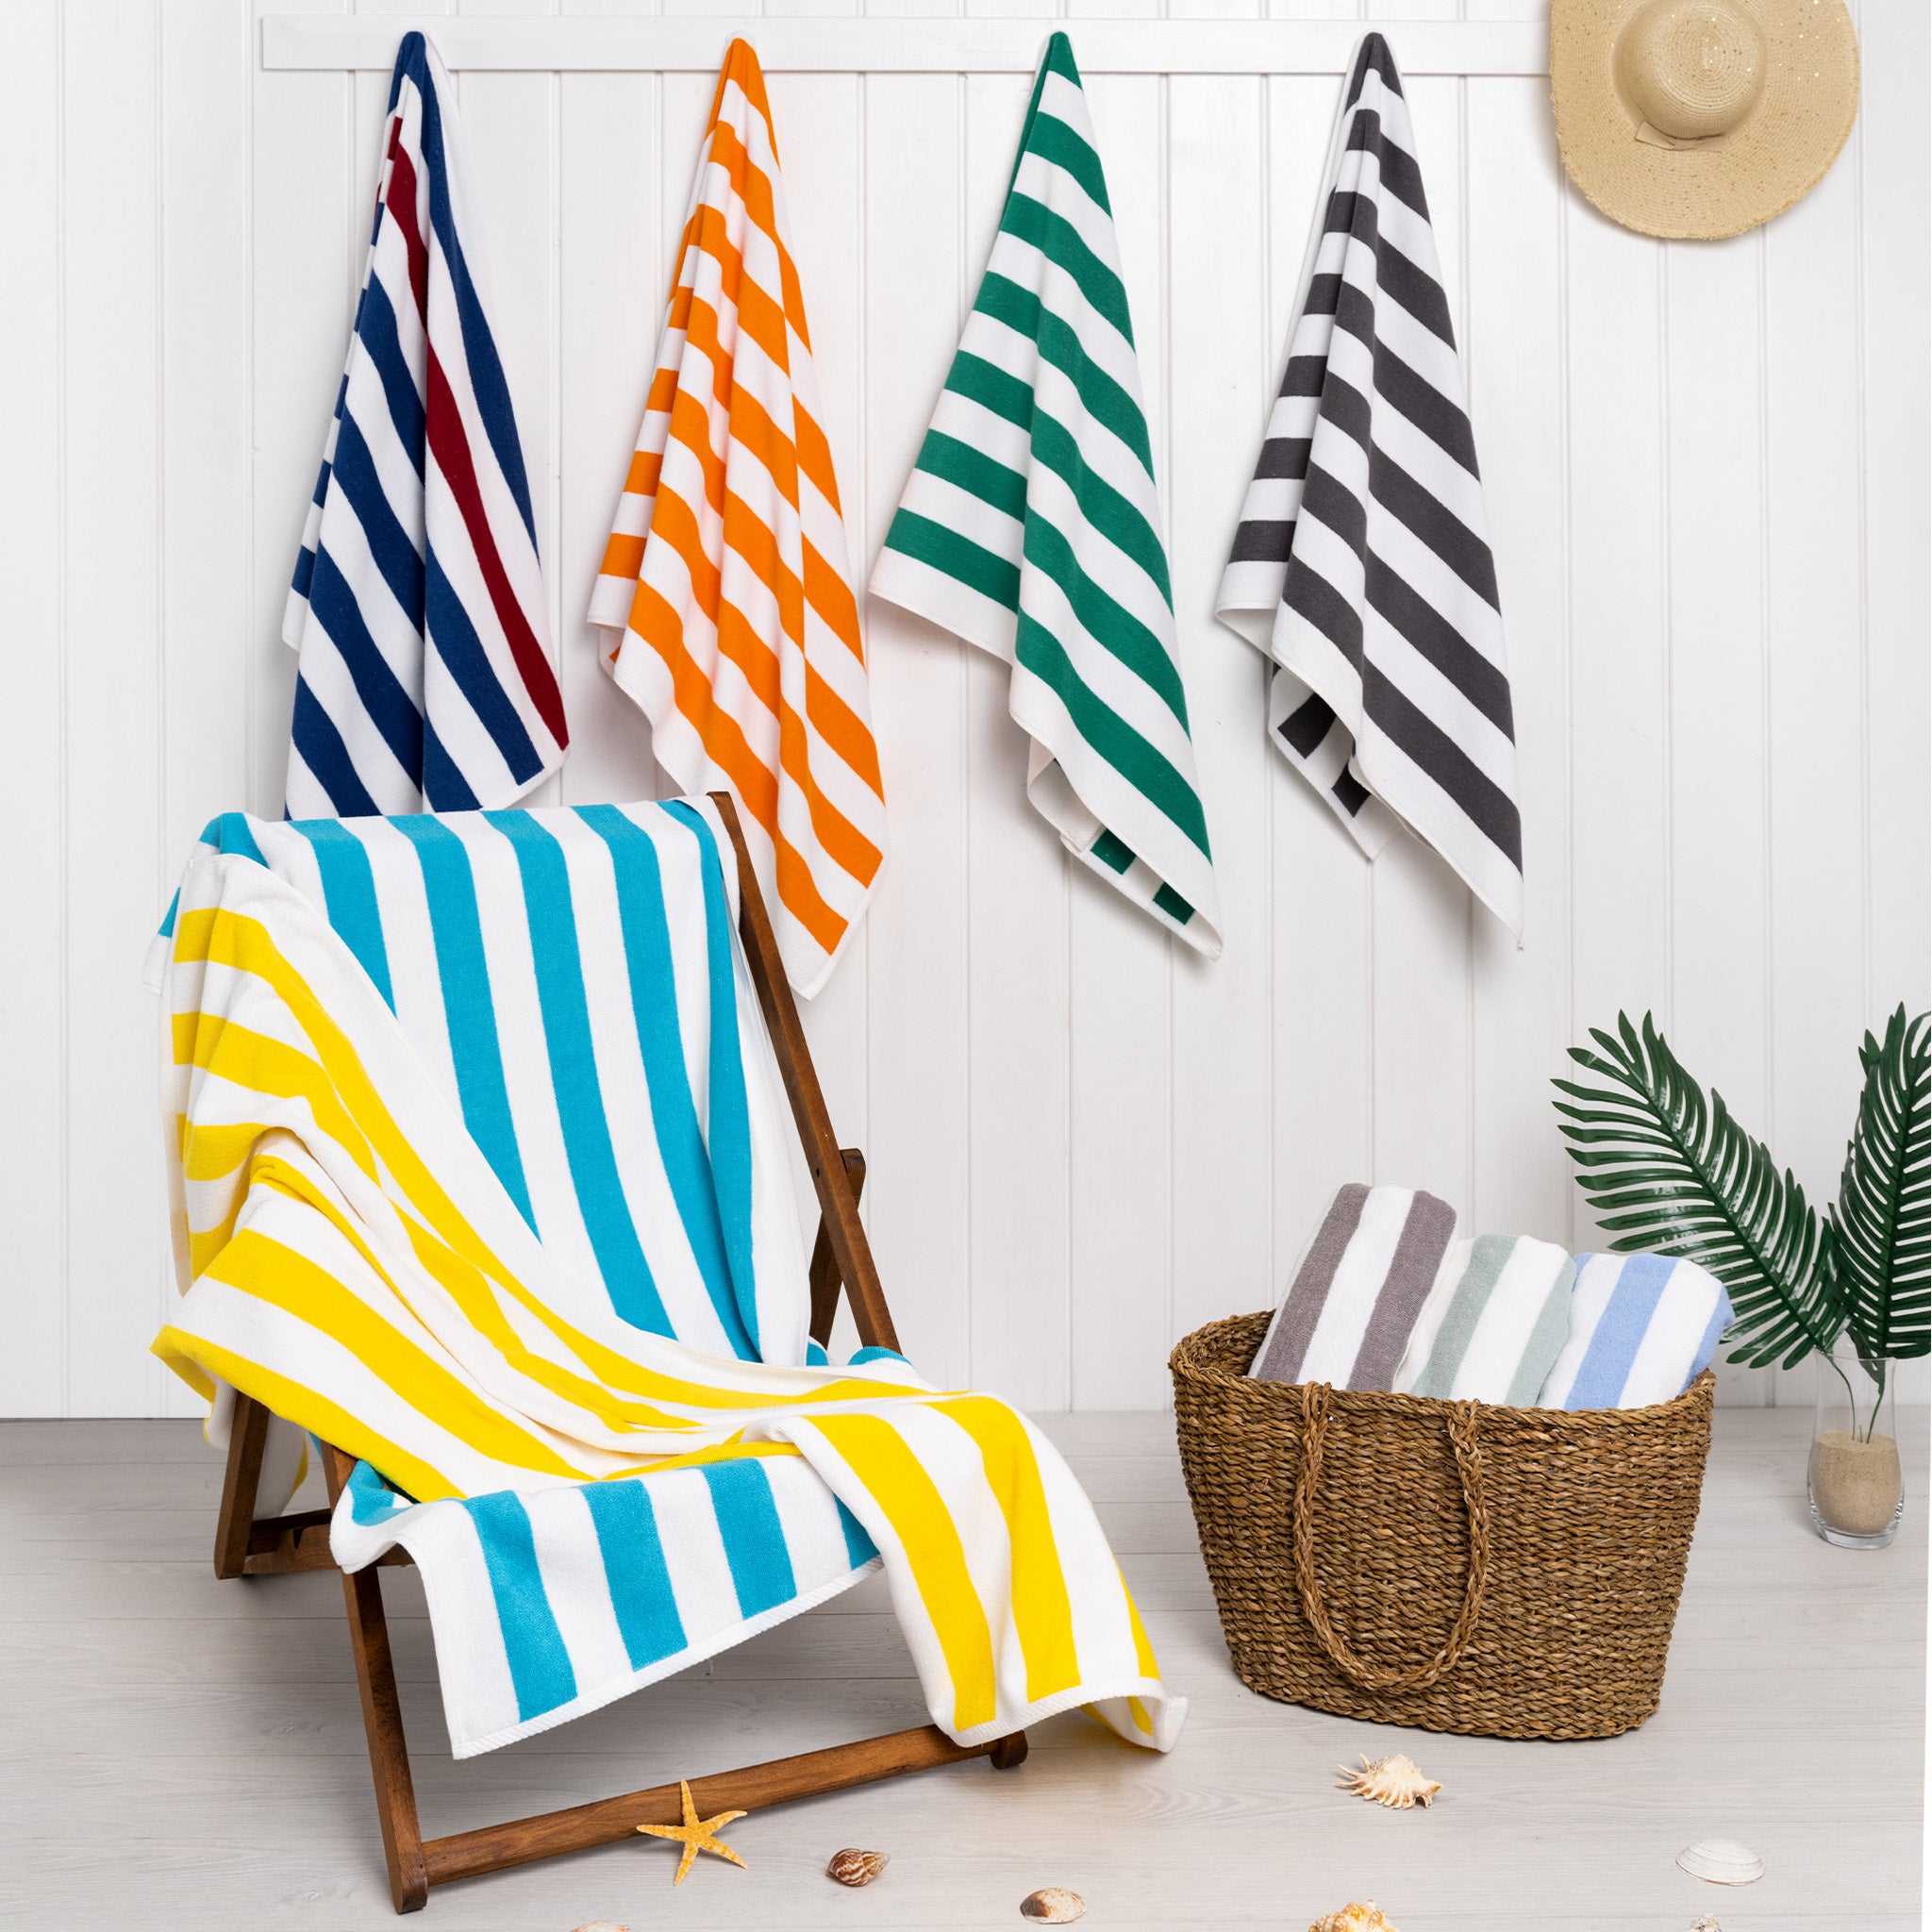 American Soft Linen 100% Cotton 4 Pack Beach Towels Cabana Striped Pool Towels -green-8